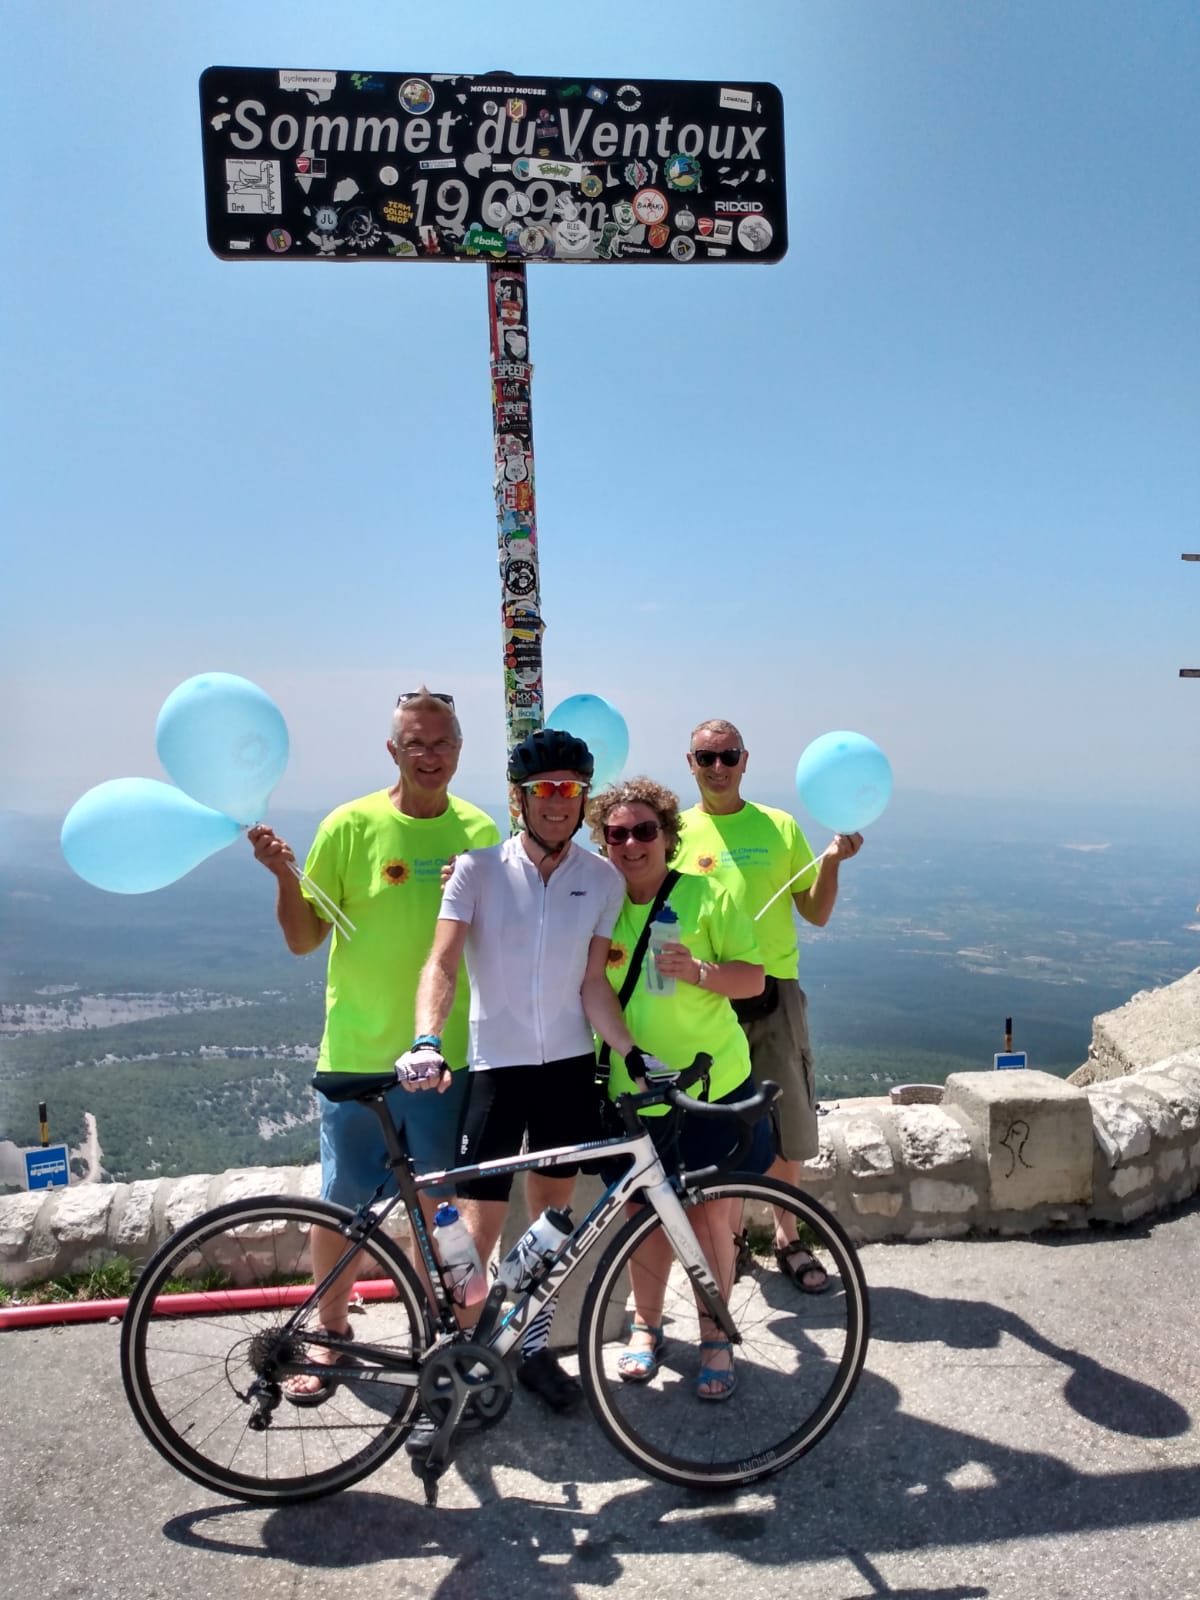 Mont Ventoux took it out of me, but we raised over 5k for charity